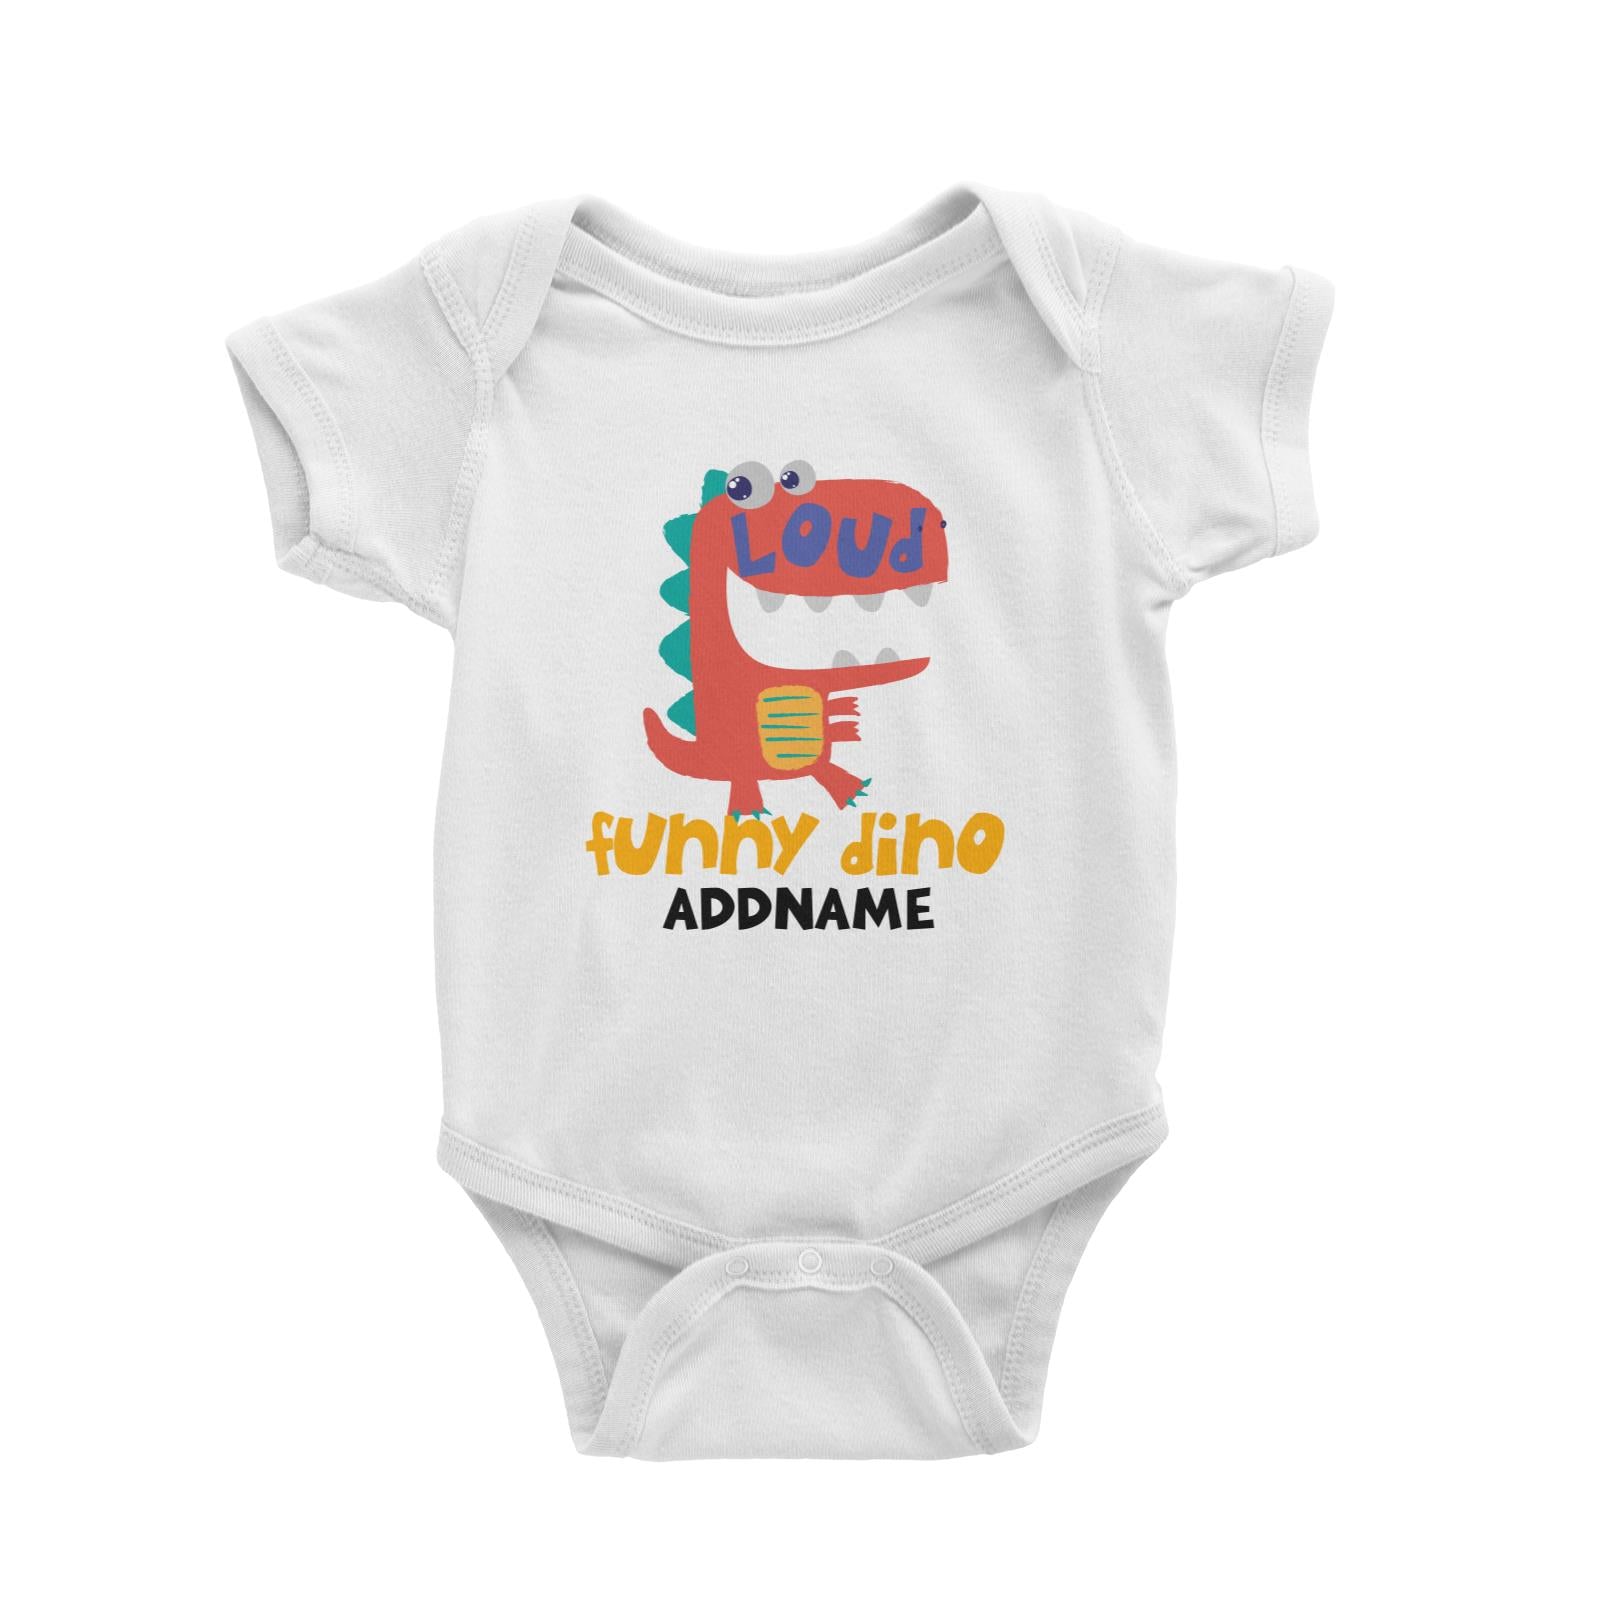 Loud Funny Dino Addname Baby Romper